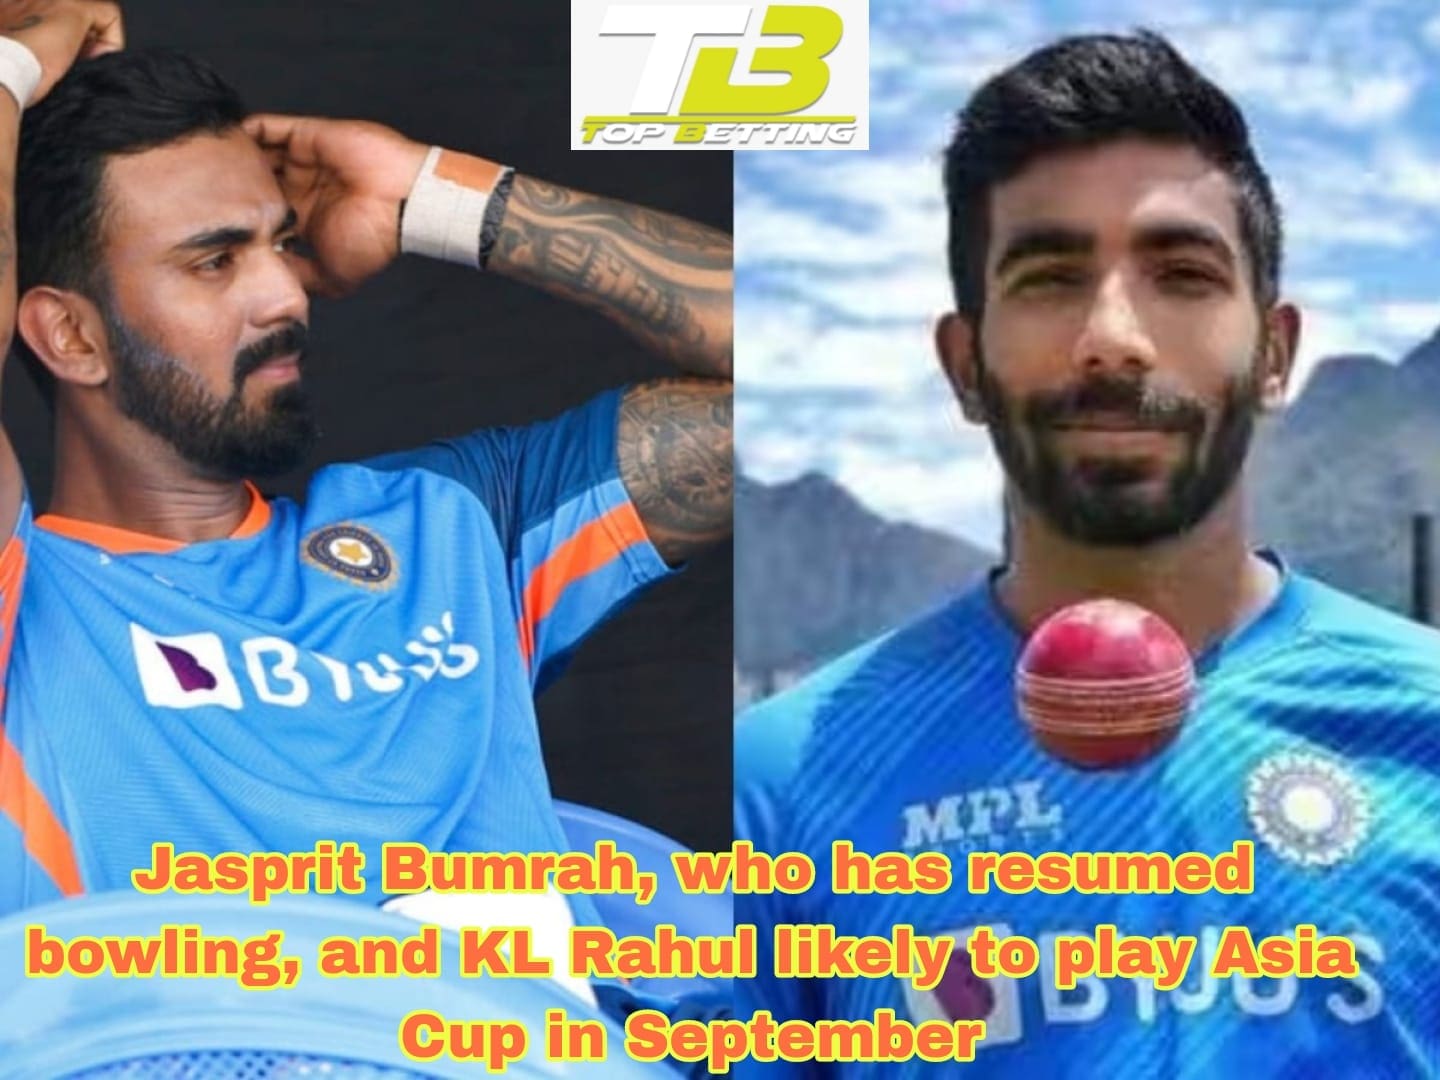 Jasprit Bumrah, who has resumed bowling, and KL Rahul likely to play Asia Cup in September